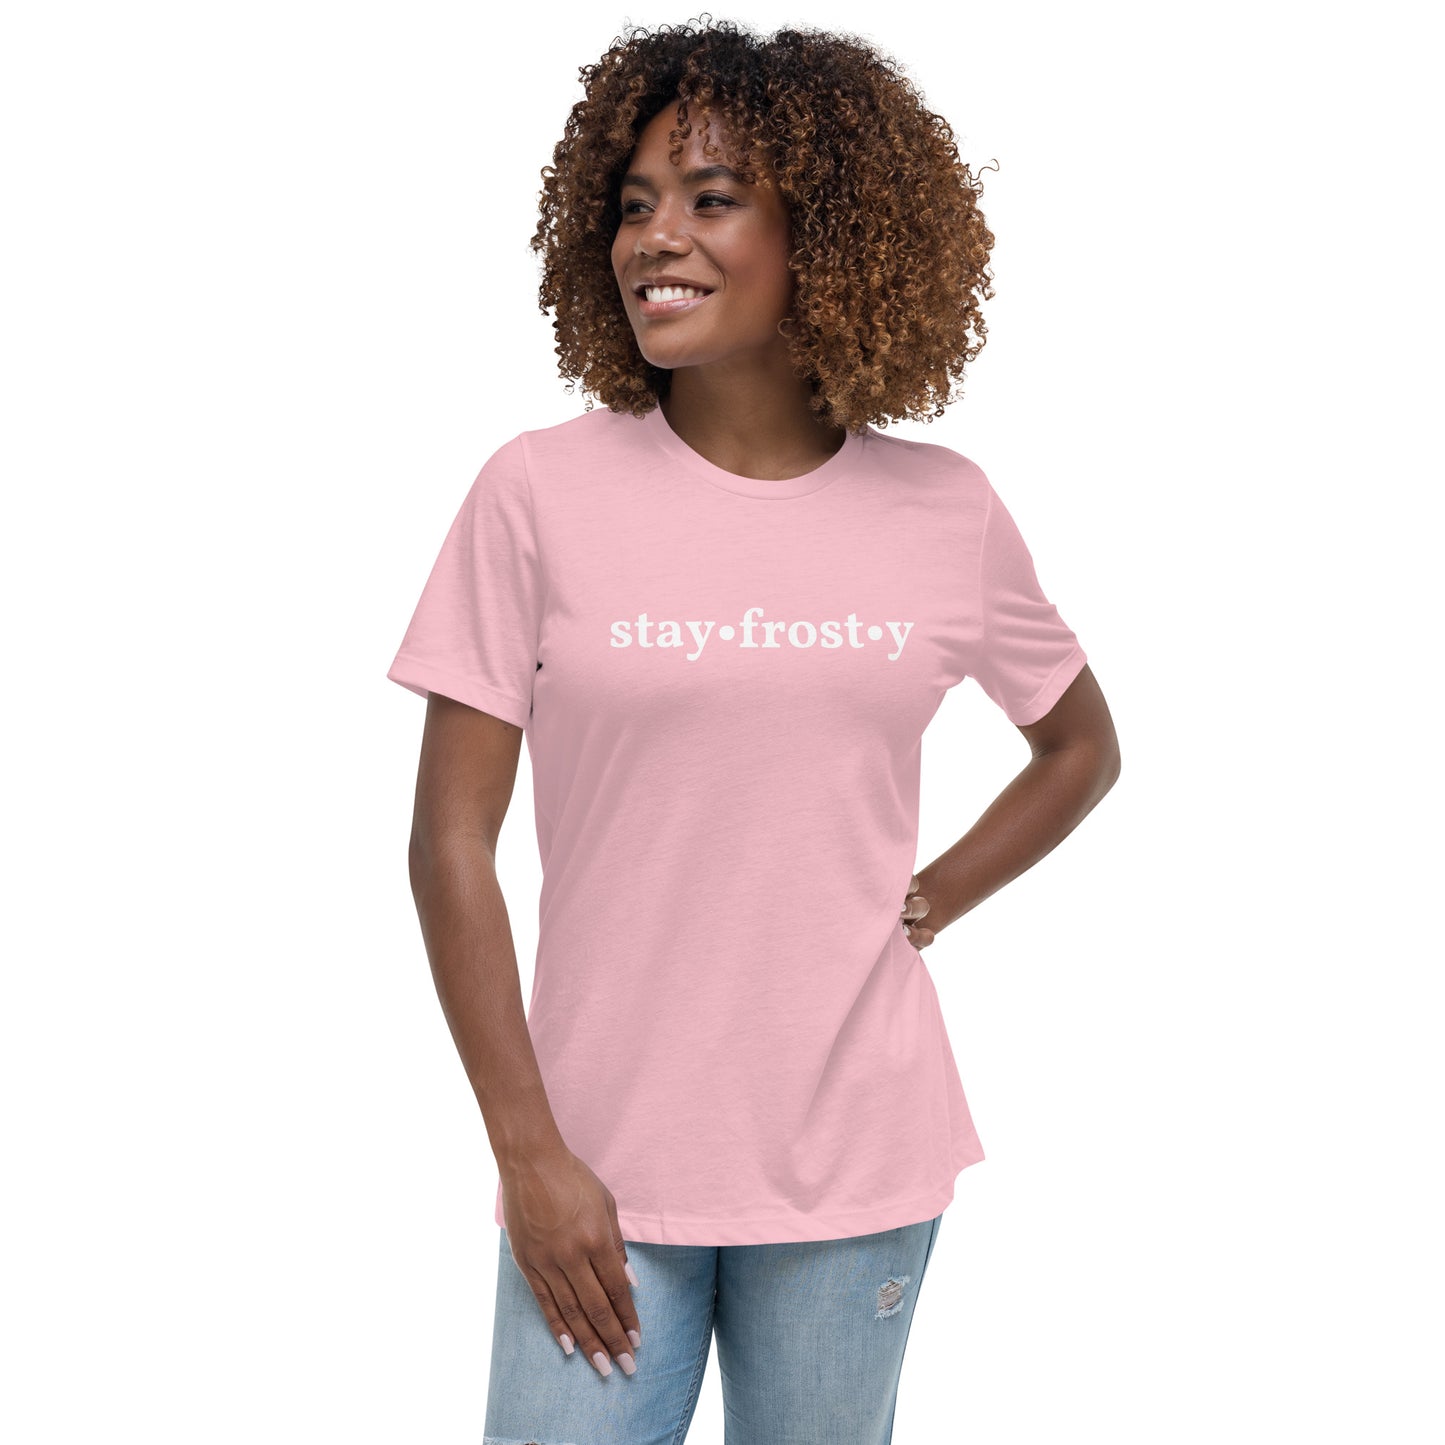 Stay Frosty, Women's Relaxed T-Shirt